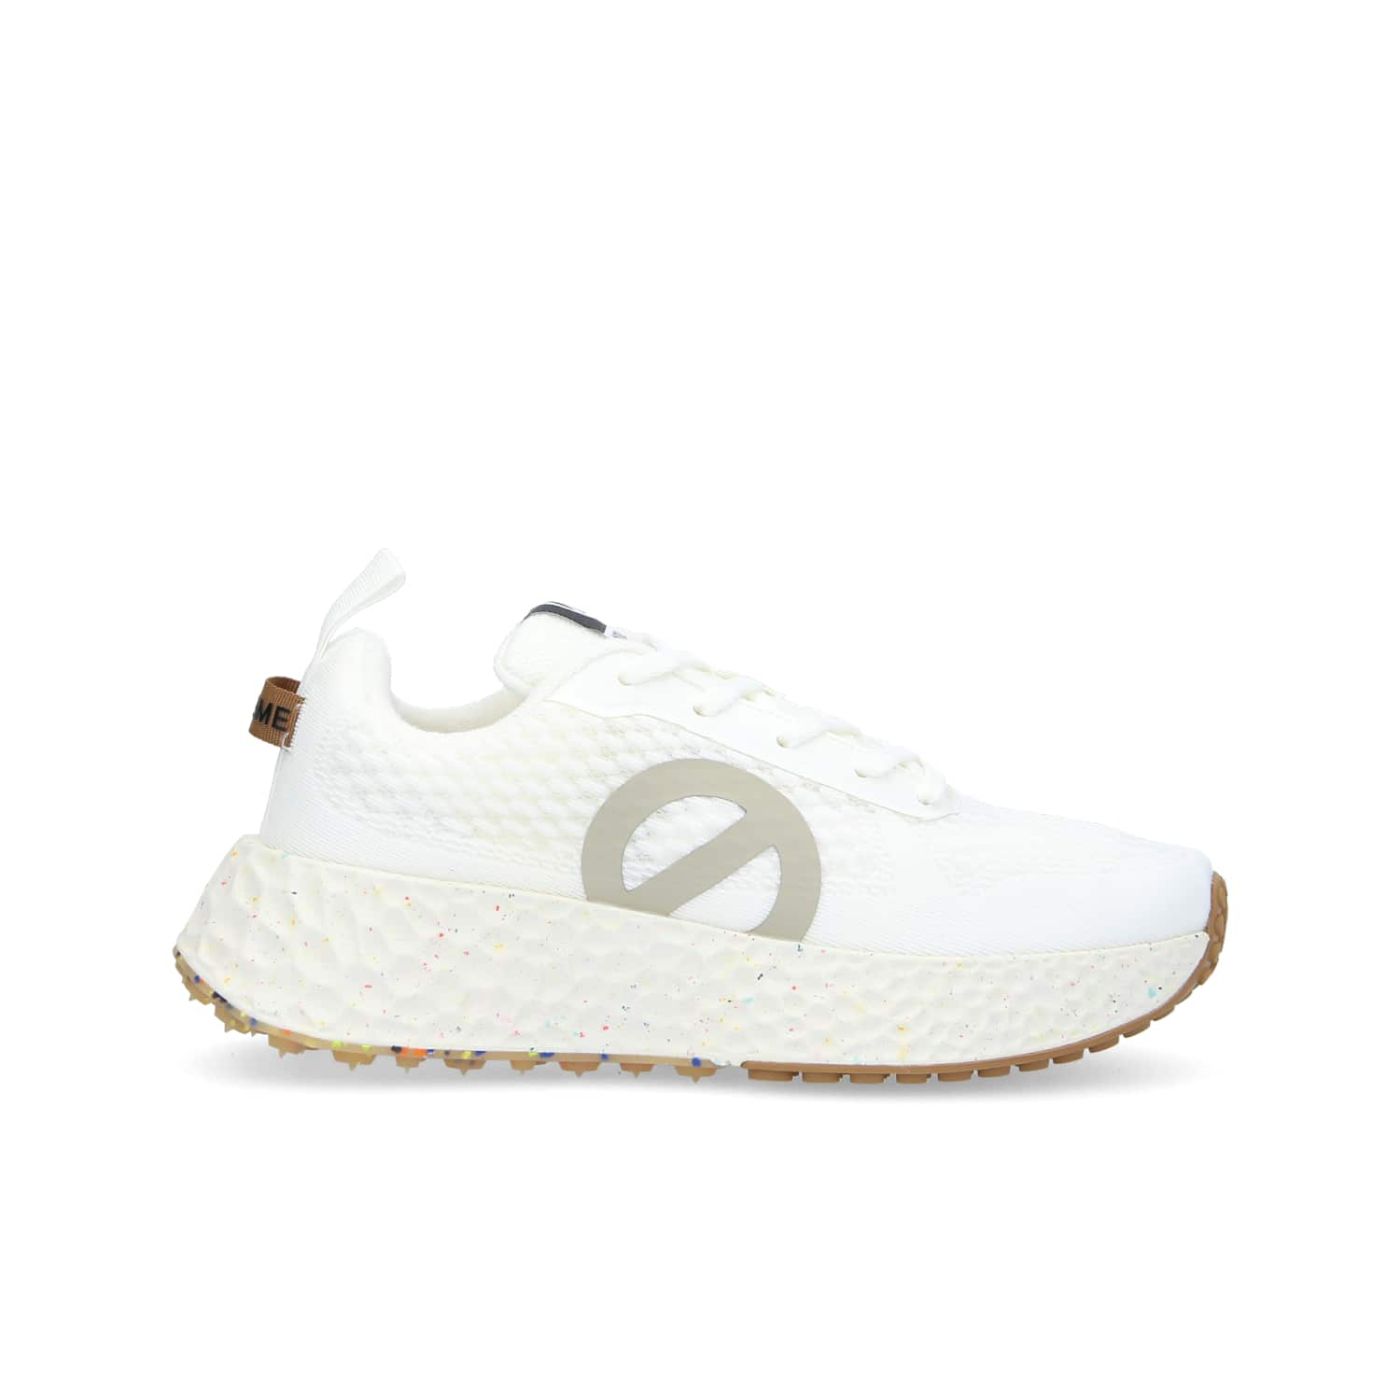 CARTER FLY - MESH RECYCLED - BLANC